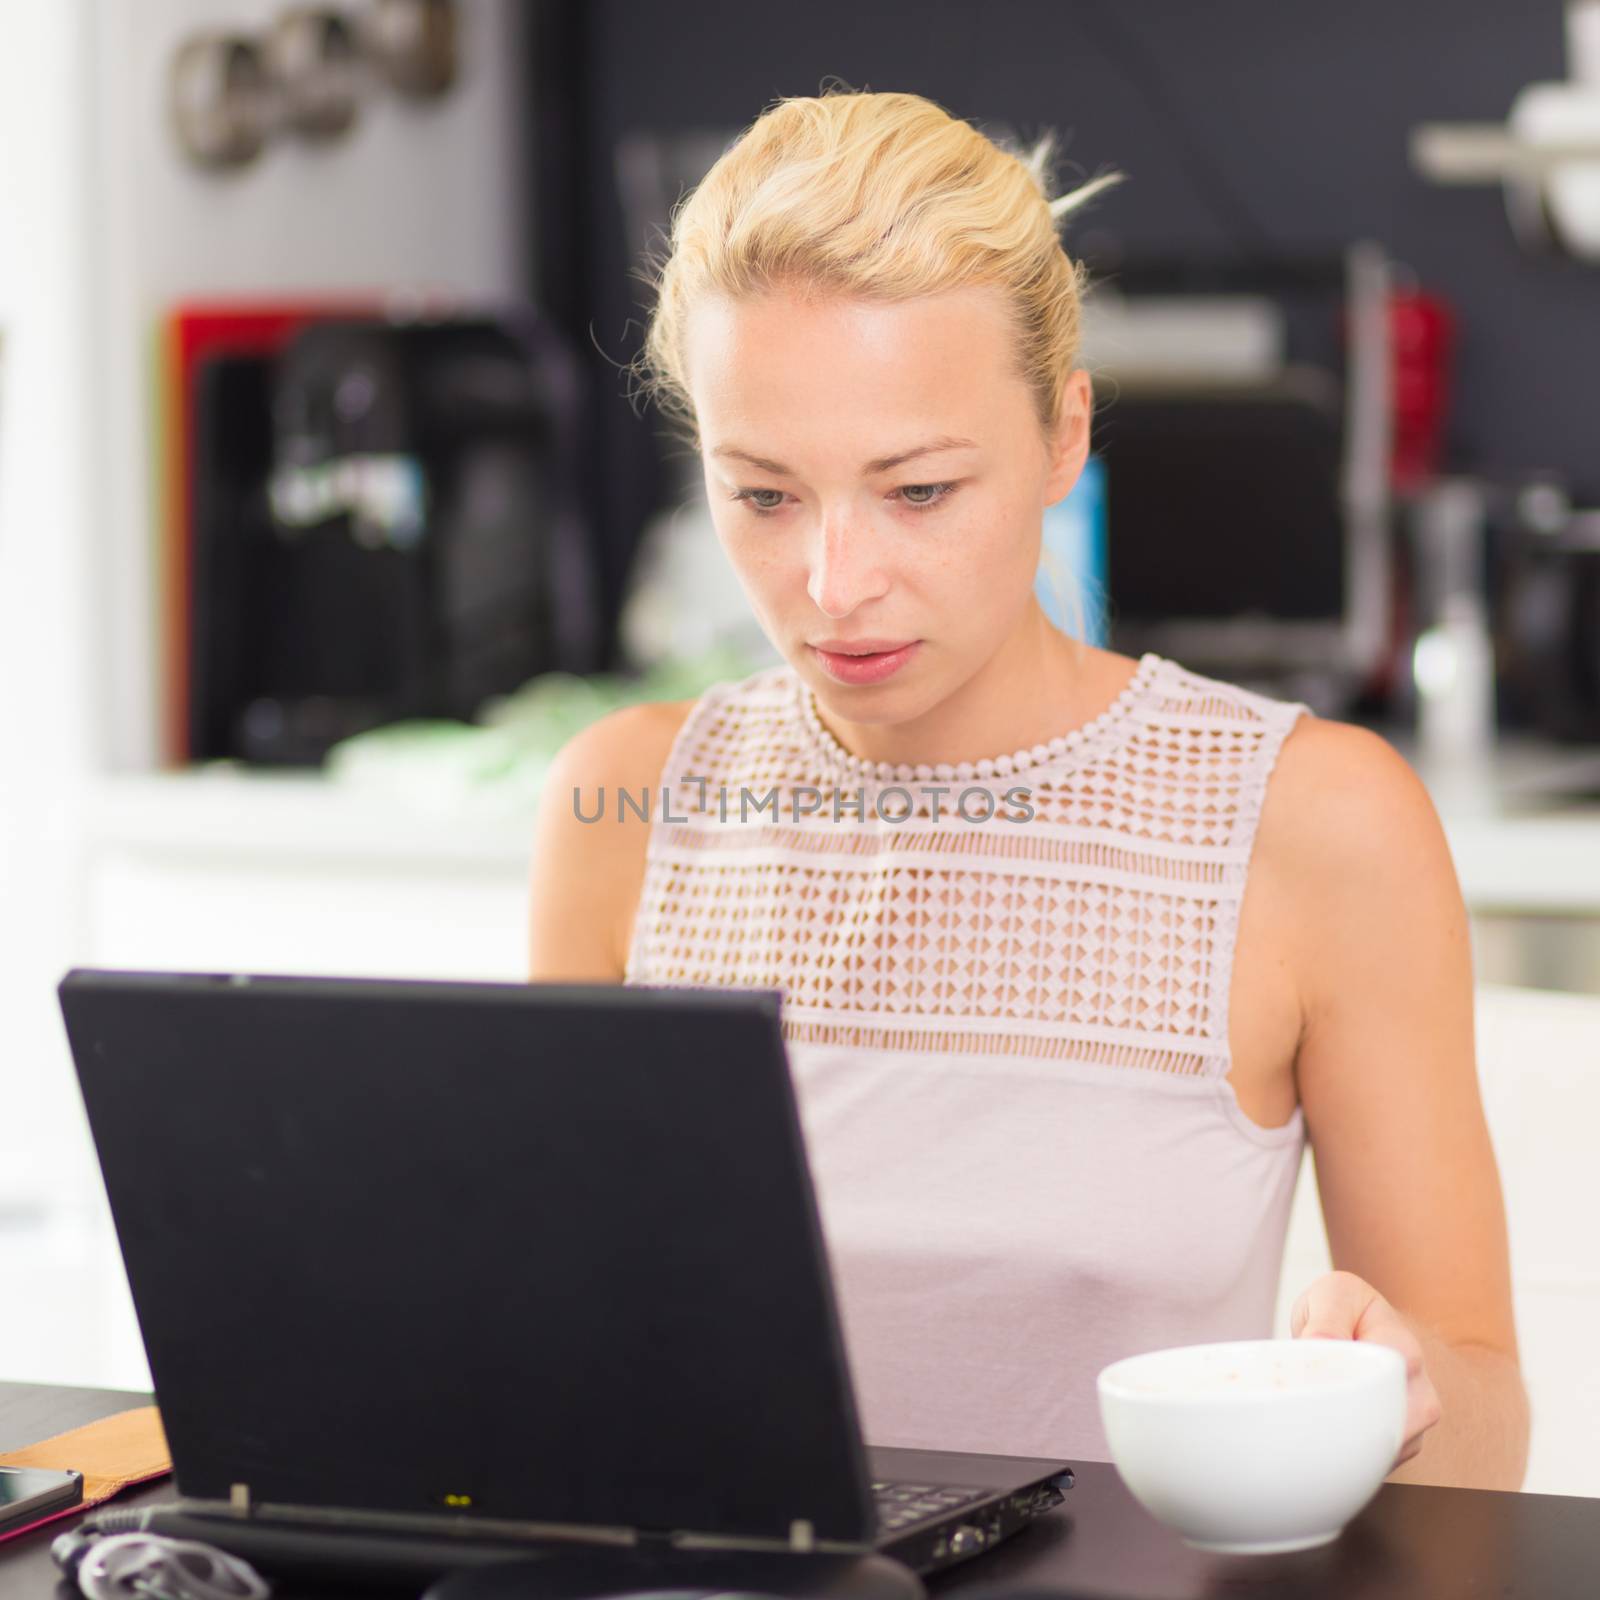 Business woman working remotly from her dining table. Home kitchen in the background.